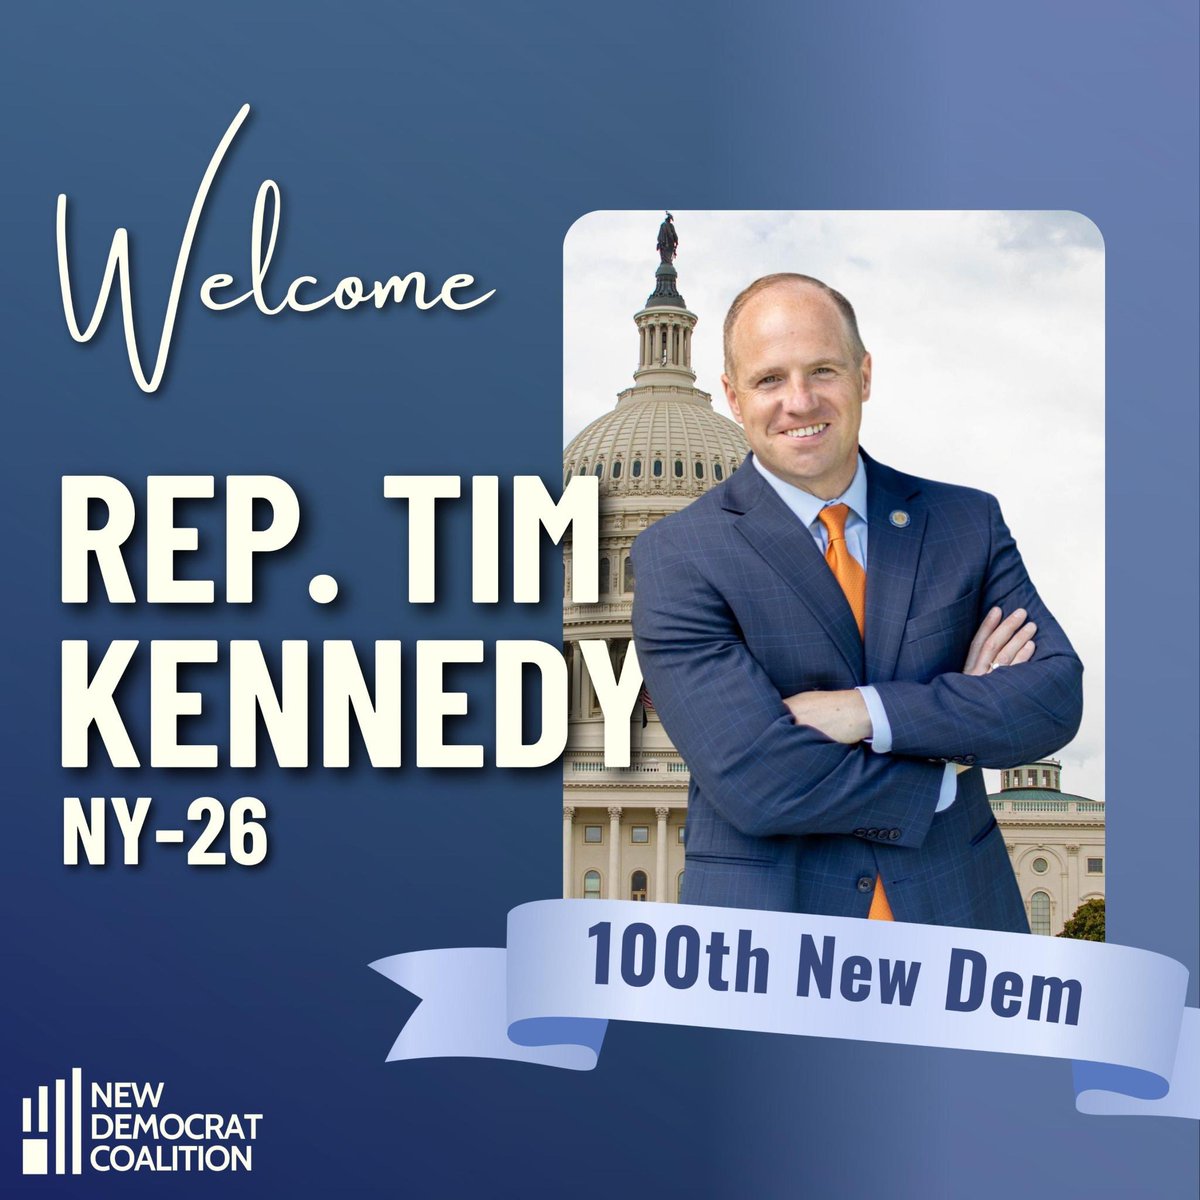 Welcome to our newest New Dem, @RepTimKennedy, representing New York’s 26th! Now 100 members strong, New Dems will keep working across the aisle to make life better for all Americans.